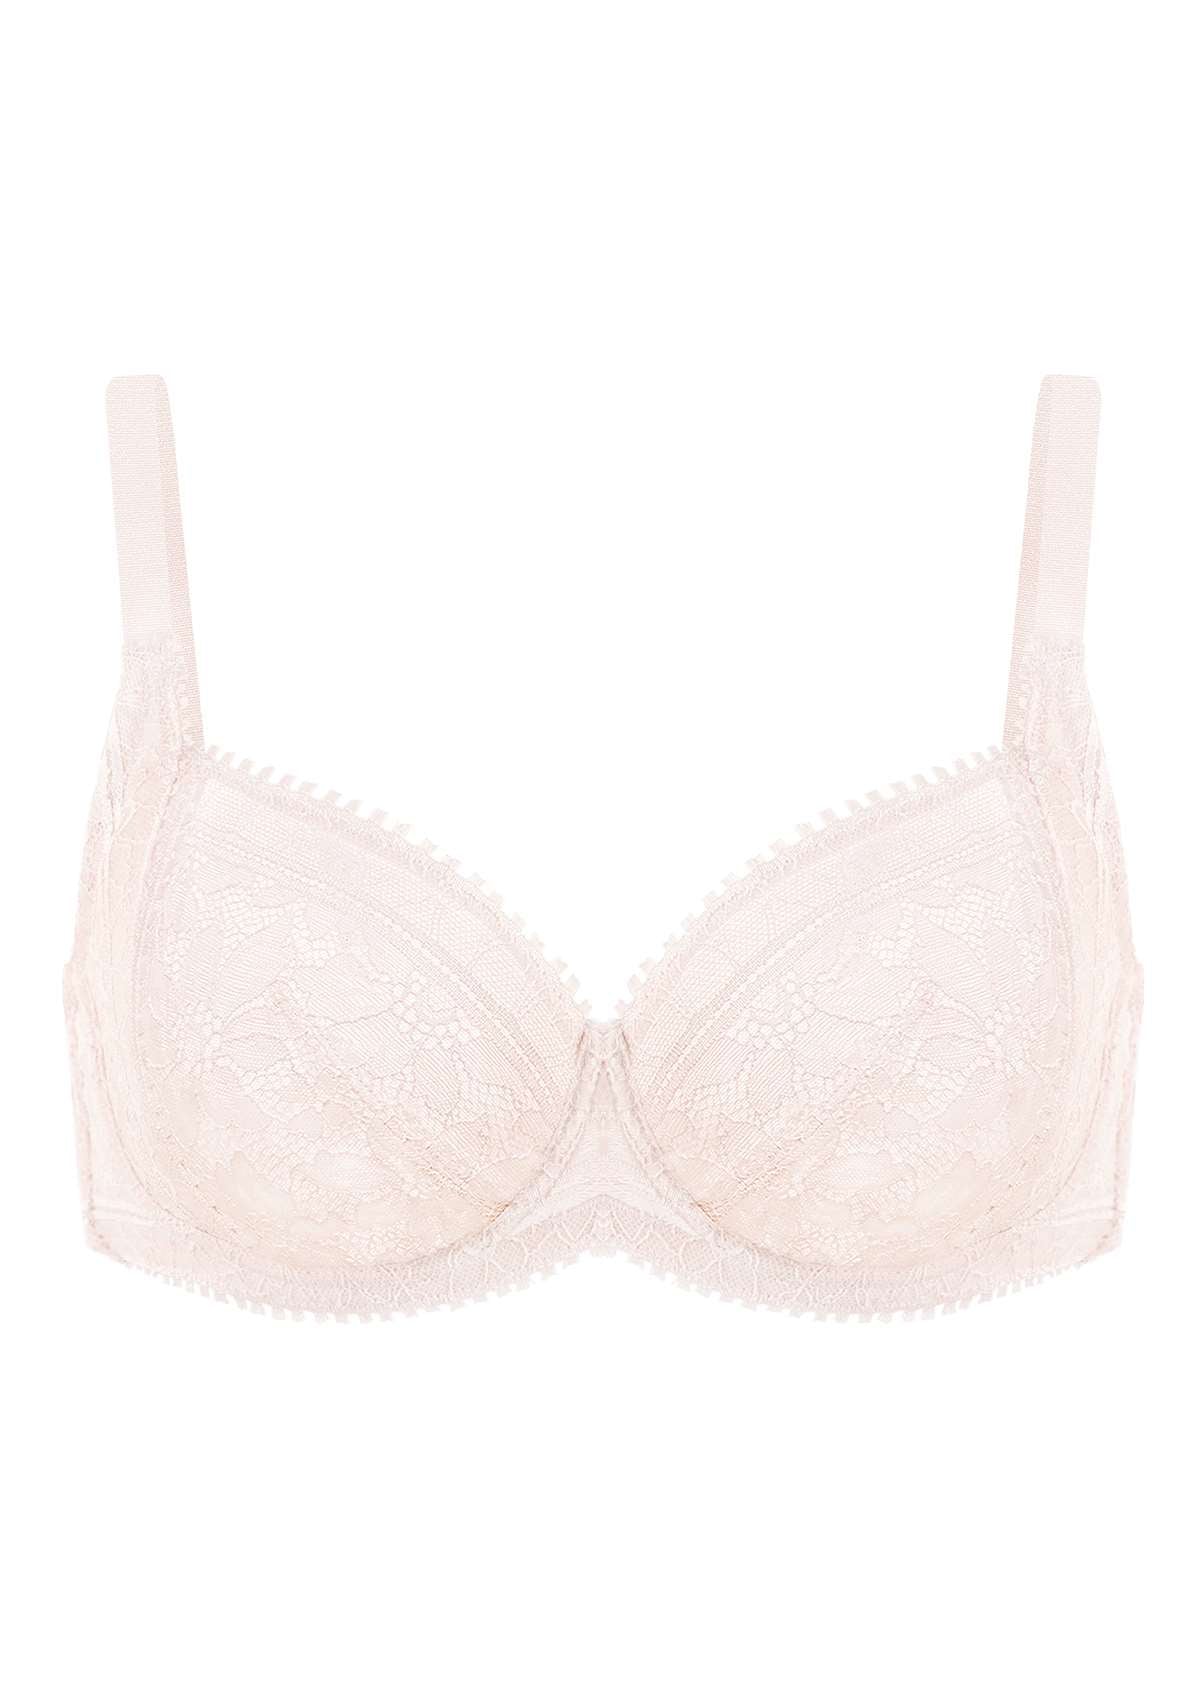 HSIA Silene Floral Delicate Unlined Lace Soft Cup Uplift Bra - Champagne / 34 / D